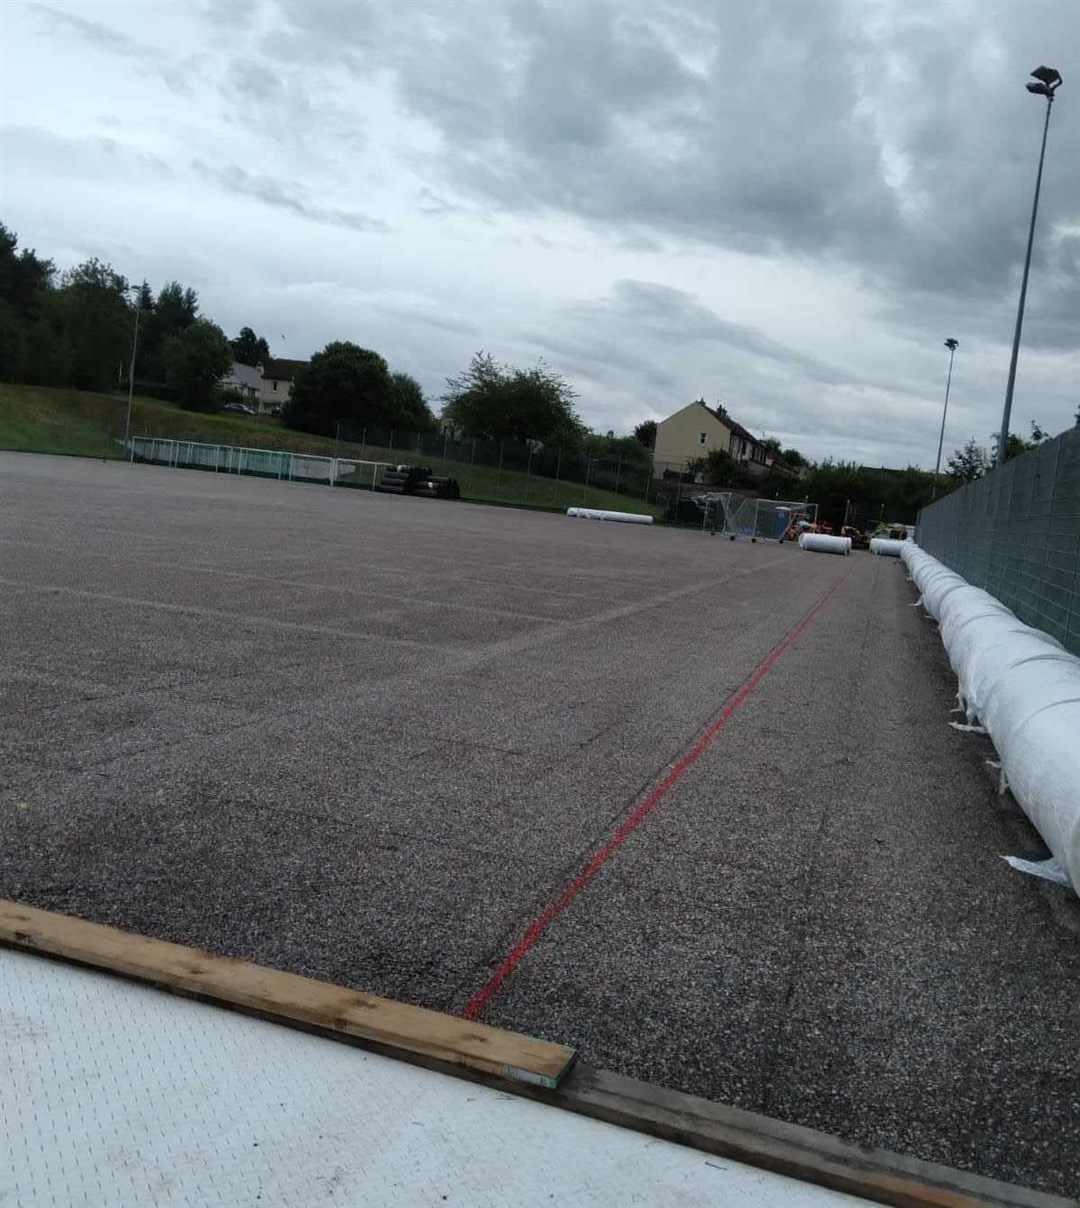 The all-weather pitch was completely refurbished, with new layers added beneath the surface.